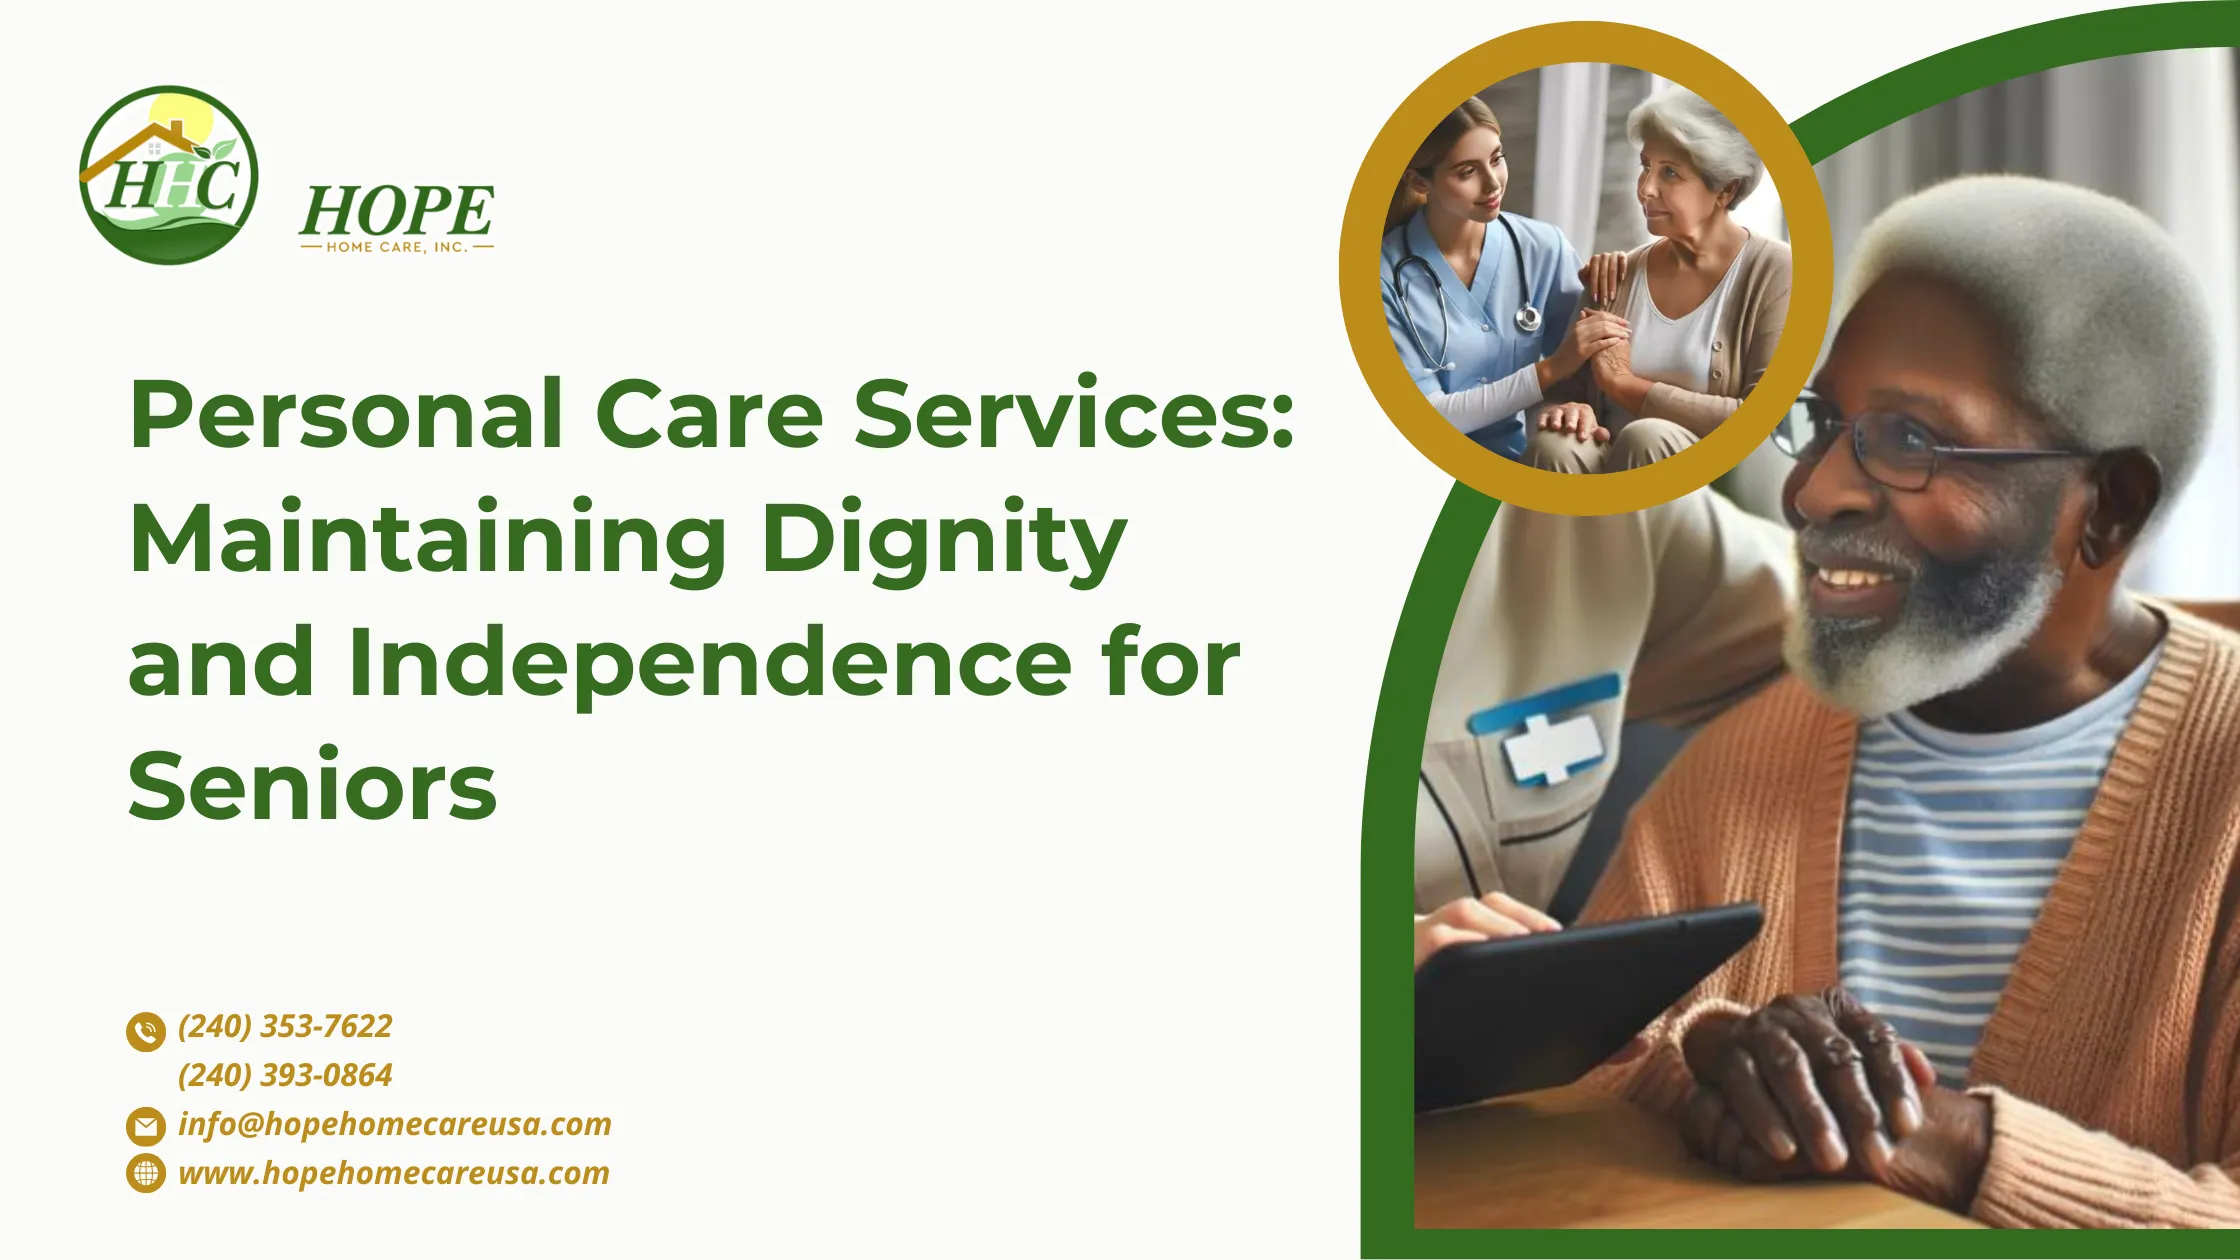 Personal Care Services: Maintaining Dignity and Independence for Seniors